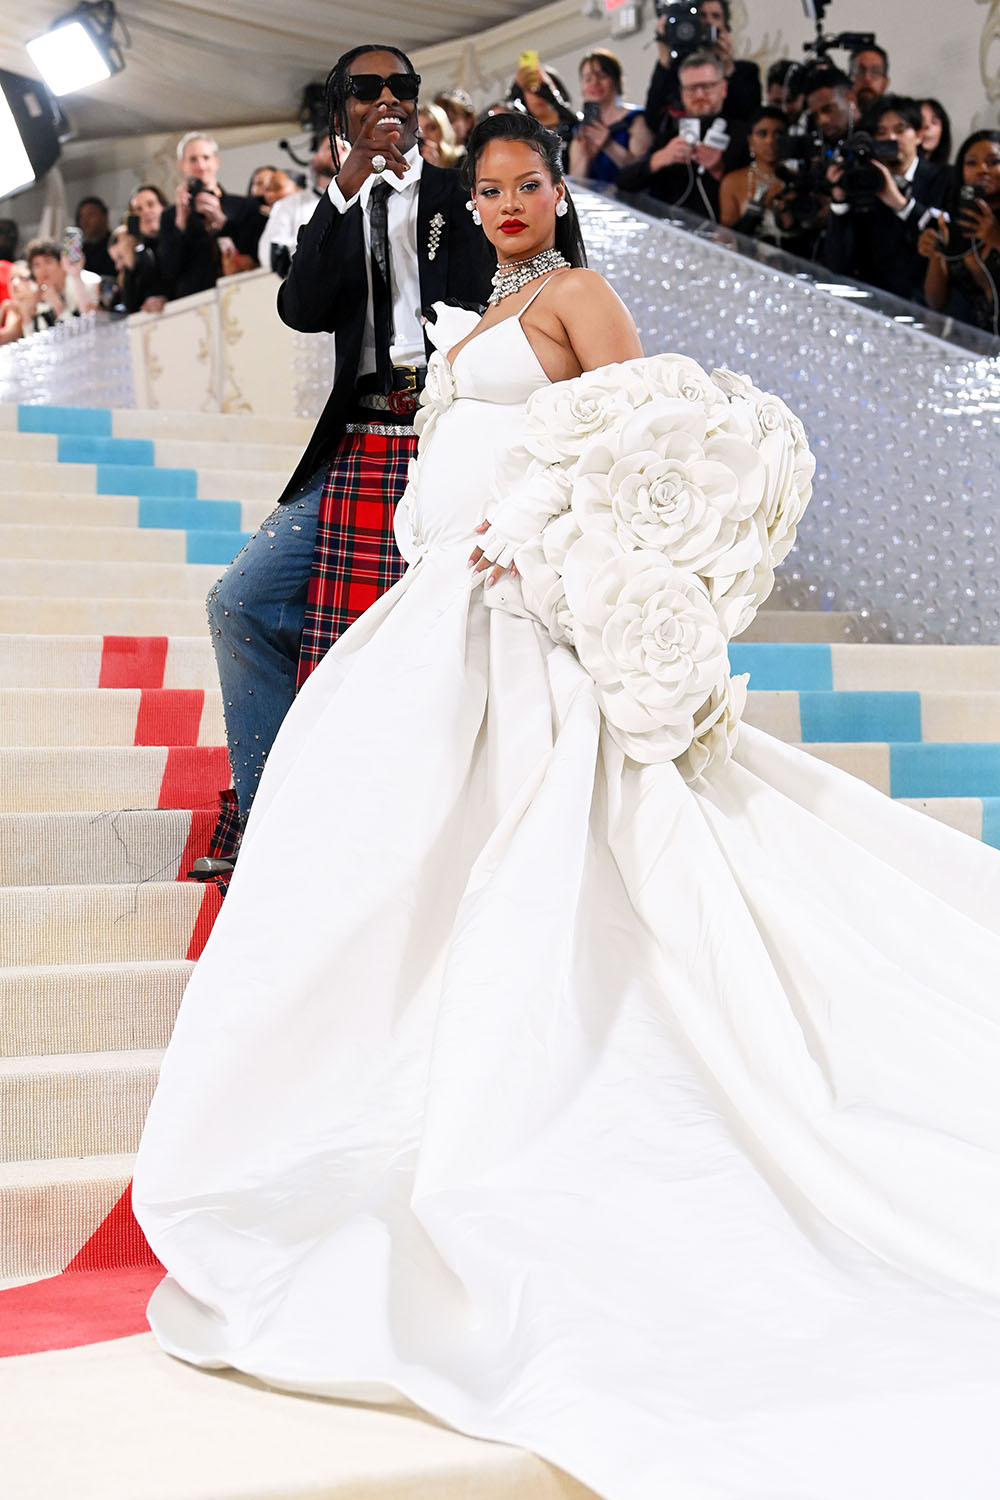 A CHANEL WEDDING GOWN AND TRAIN